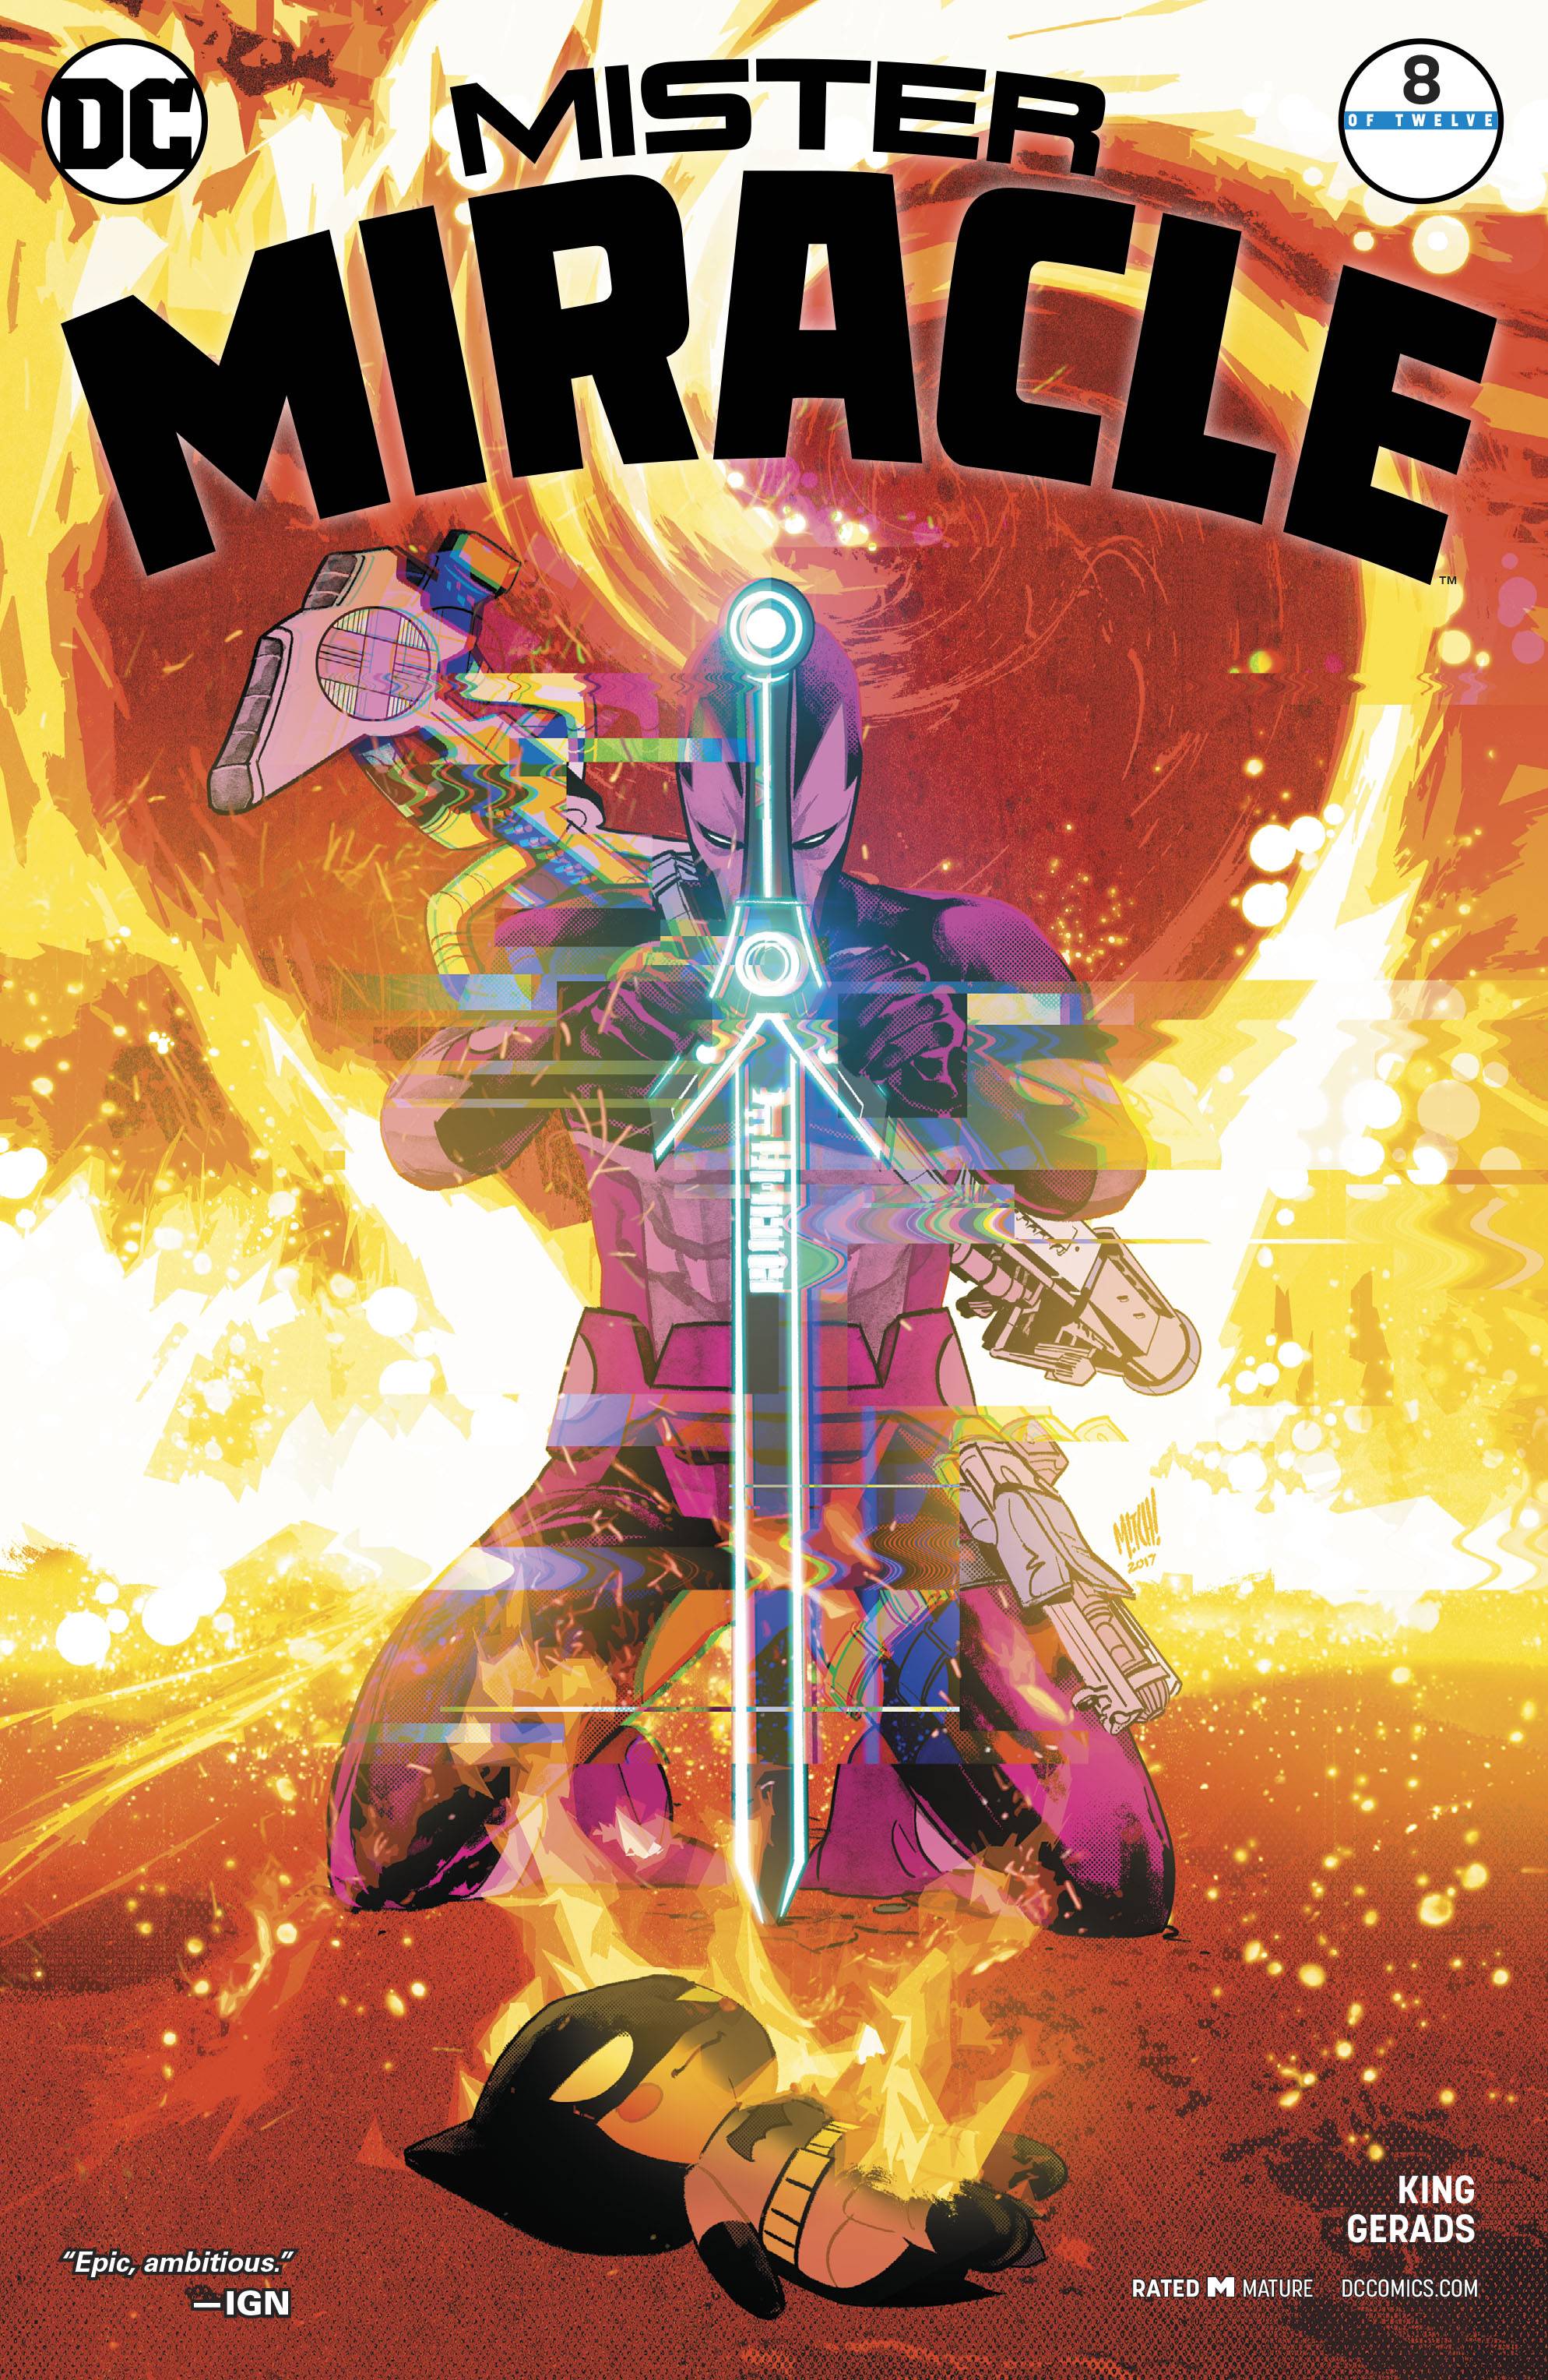 Mister Miracle #8 Variant Edition (Of 12) (Mature)